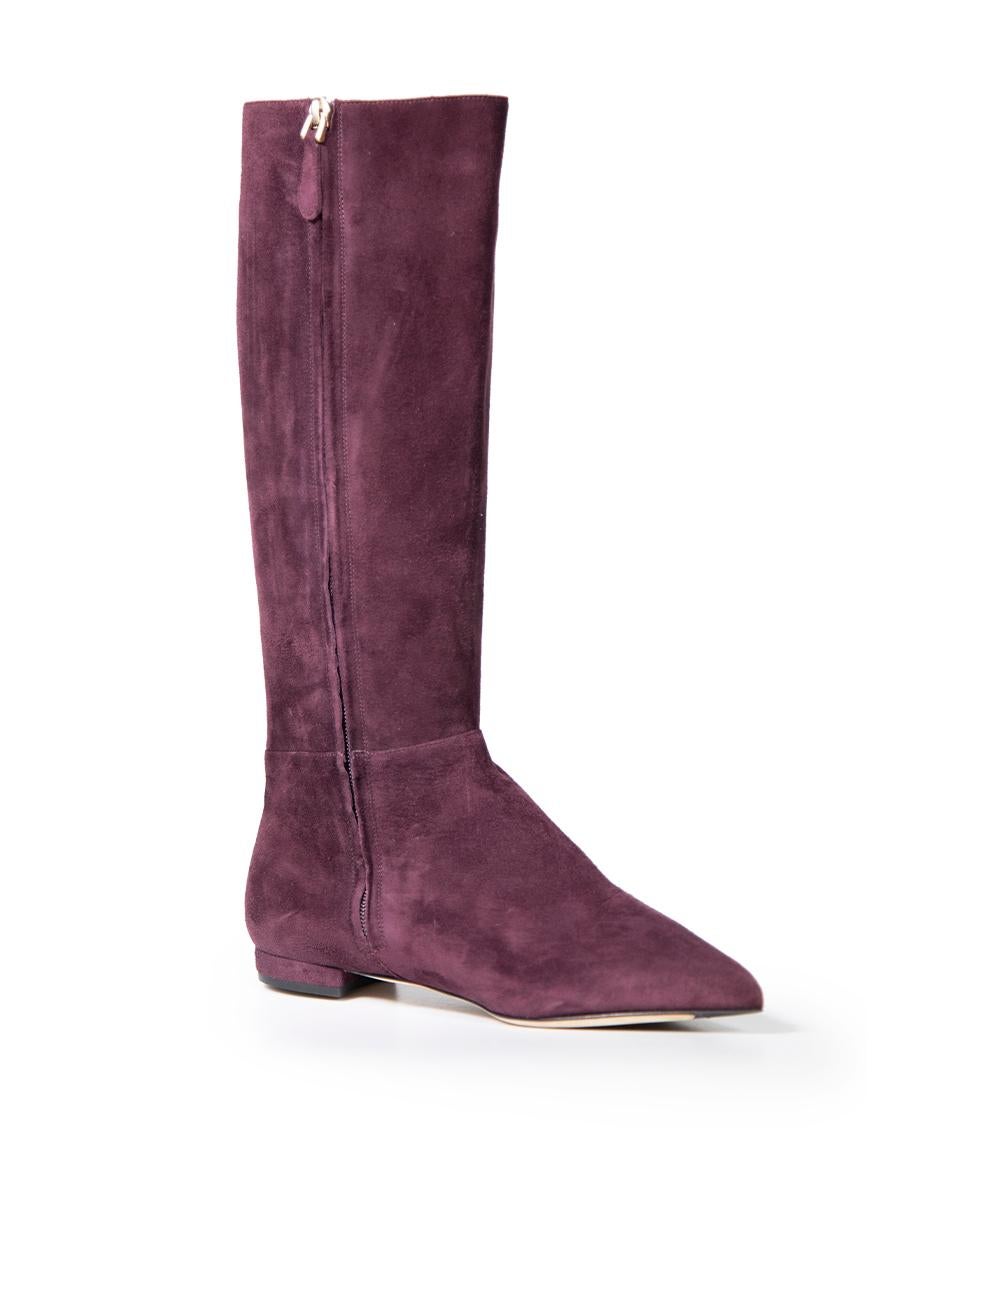 CONDITION is Very good. Minimal wear to boots is evident. Minimal wear to the right boot with bubbling to the sole on this used Bally designer resale item.
 
 
 
 Details
 
 
 Purple
 
 Suede
 
 Boots
 
 Mid calf
 
 Point toe
 
 Side zip fastening
